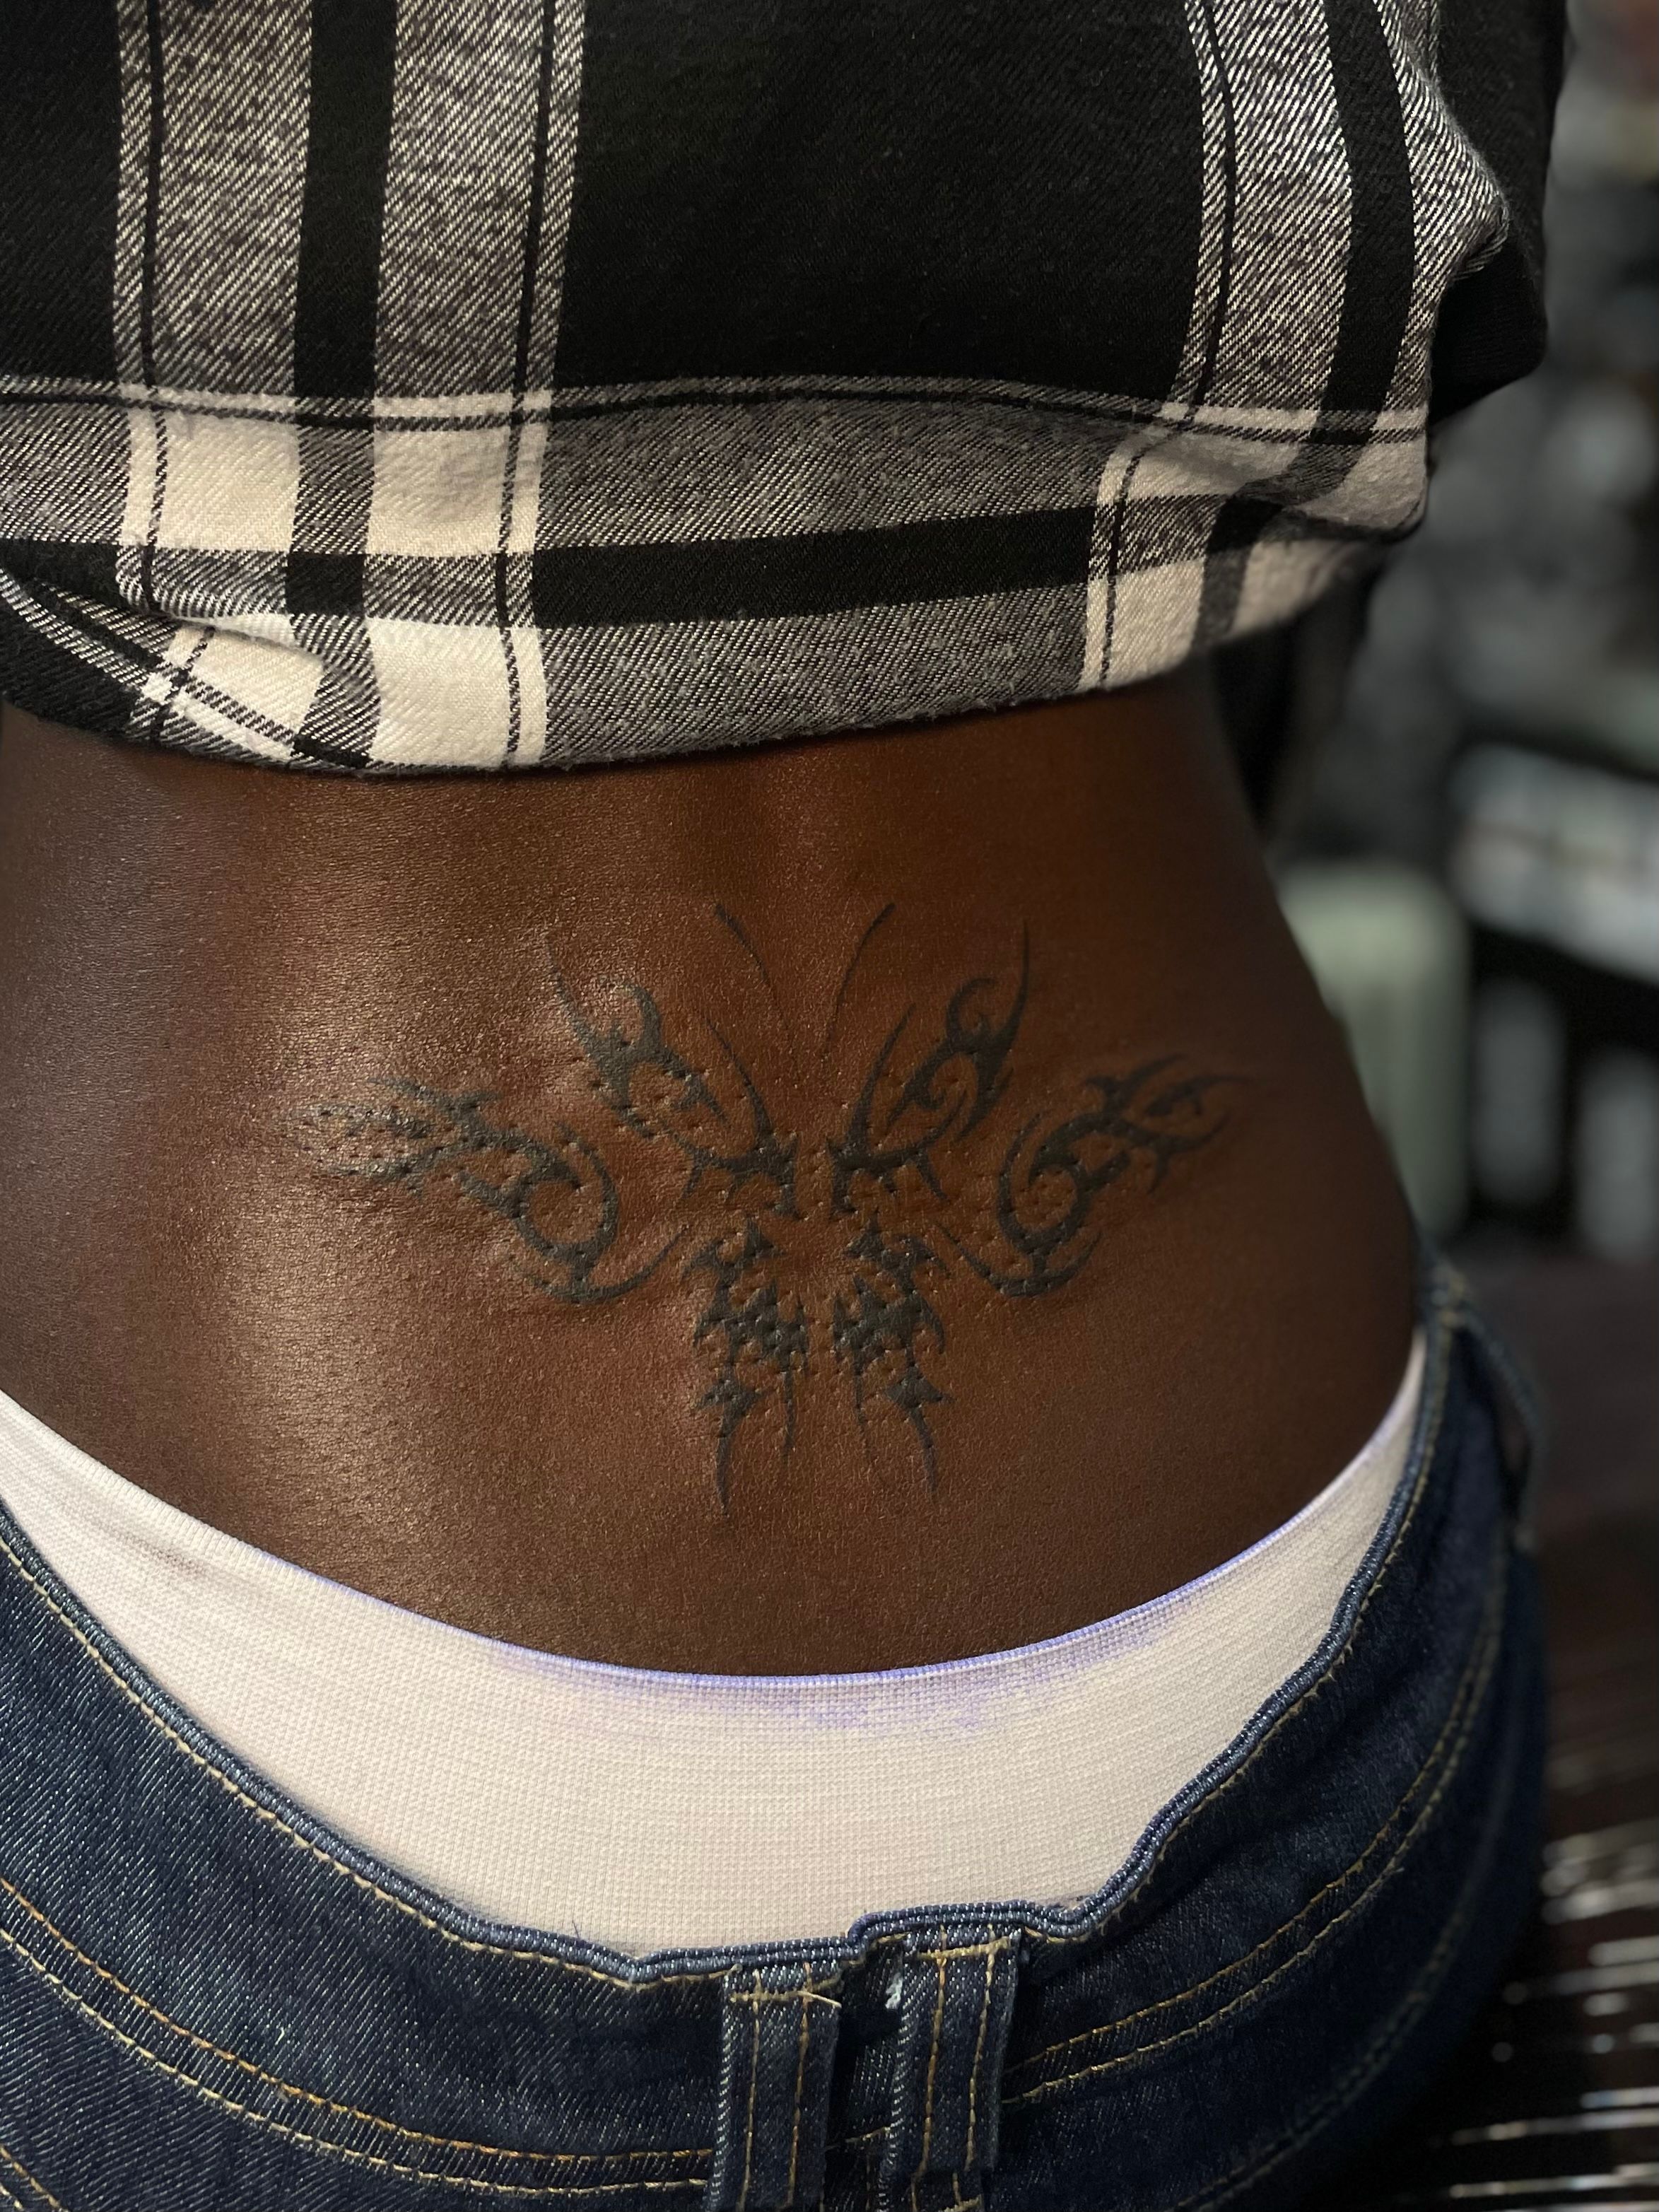 tramp stamp | Tattoos for lovers, Red ink tattoos, Dope tattoos